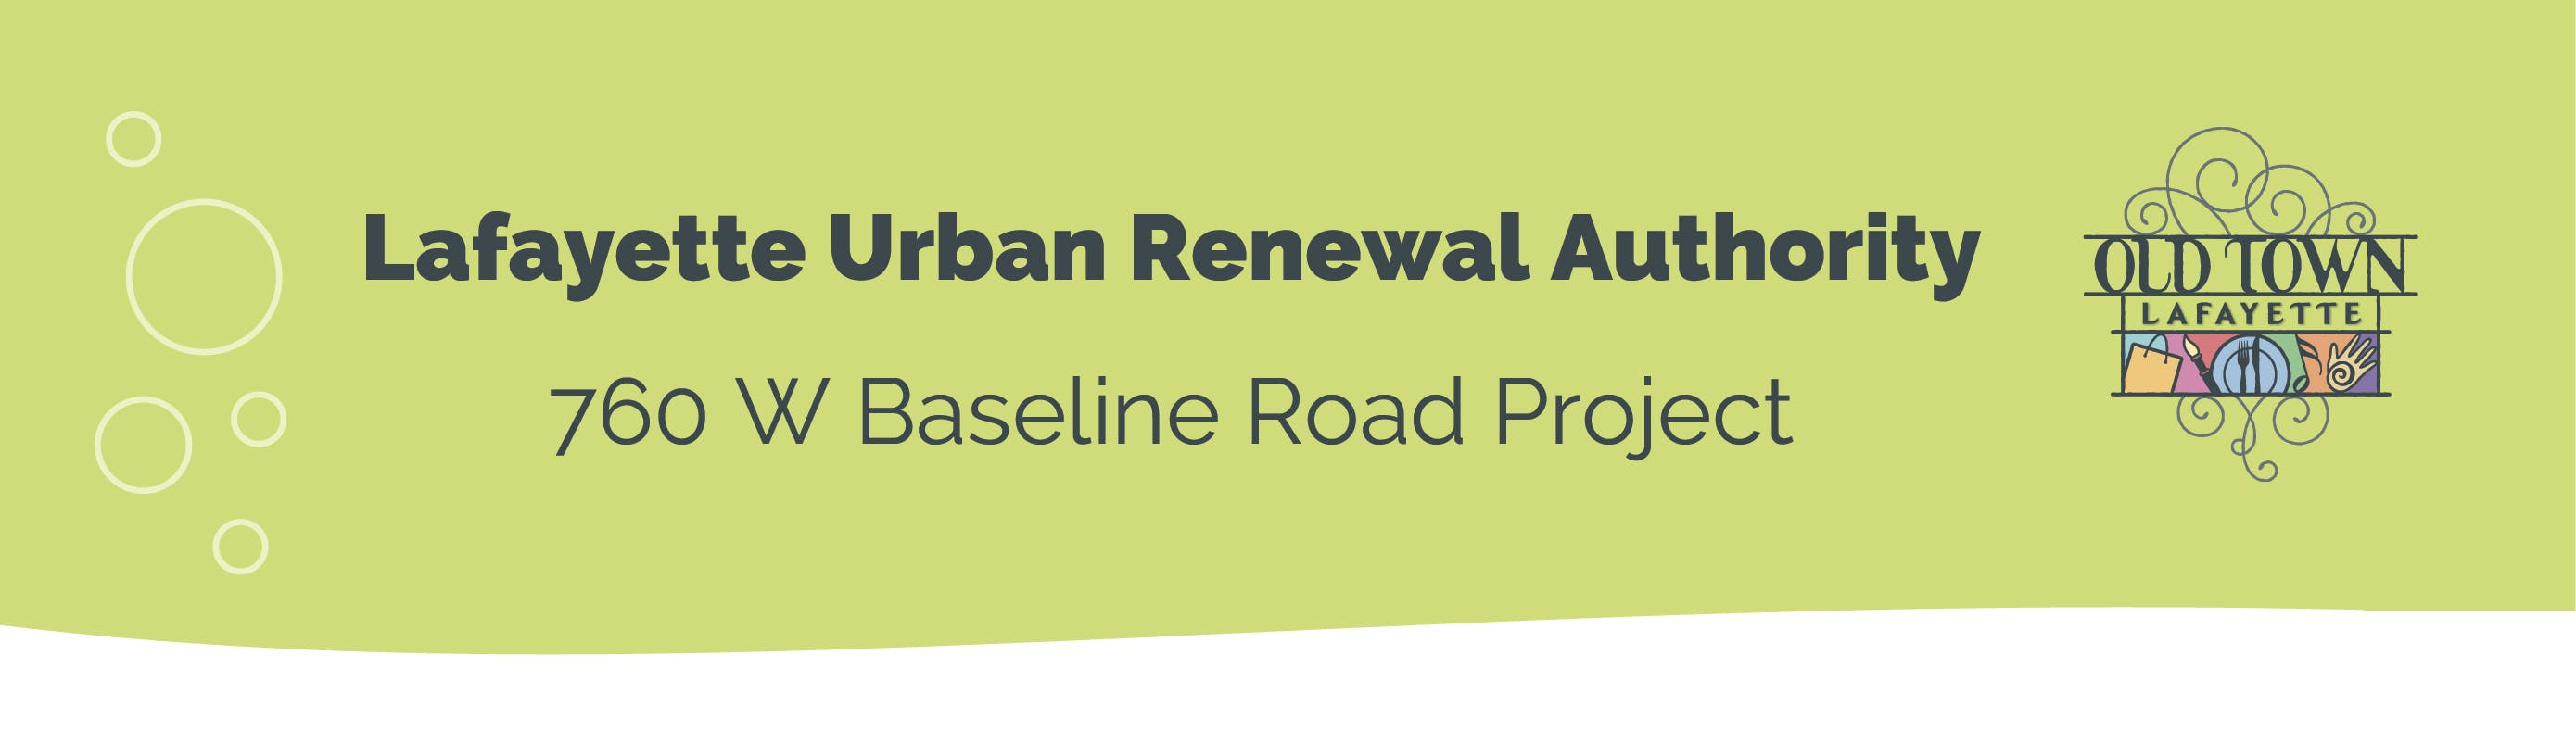 760 Baseline Road Project Lafayette Urban Renewal Authority green banner